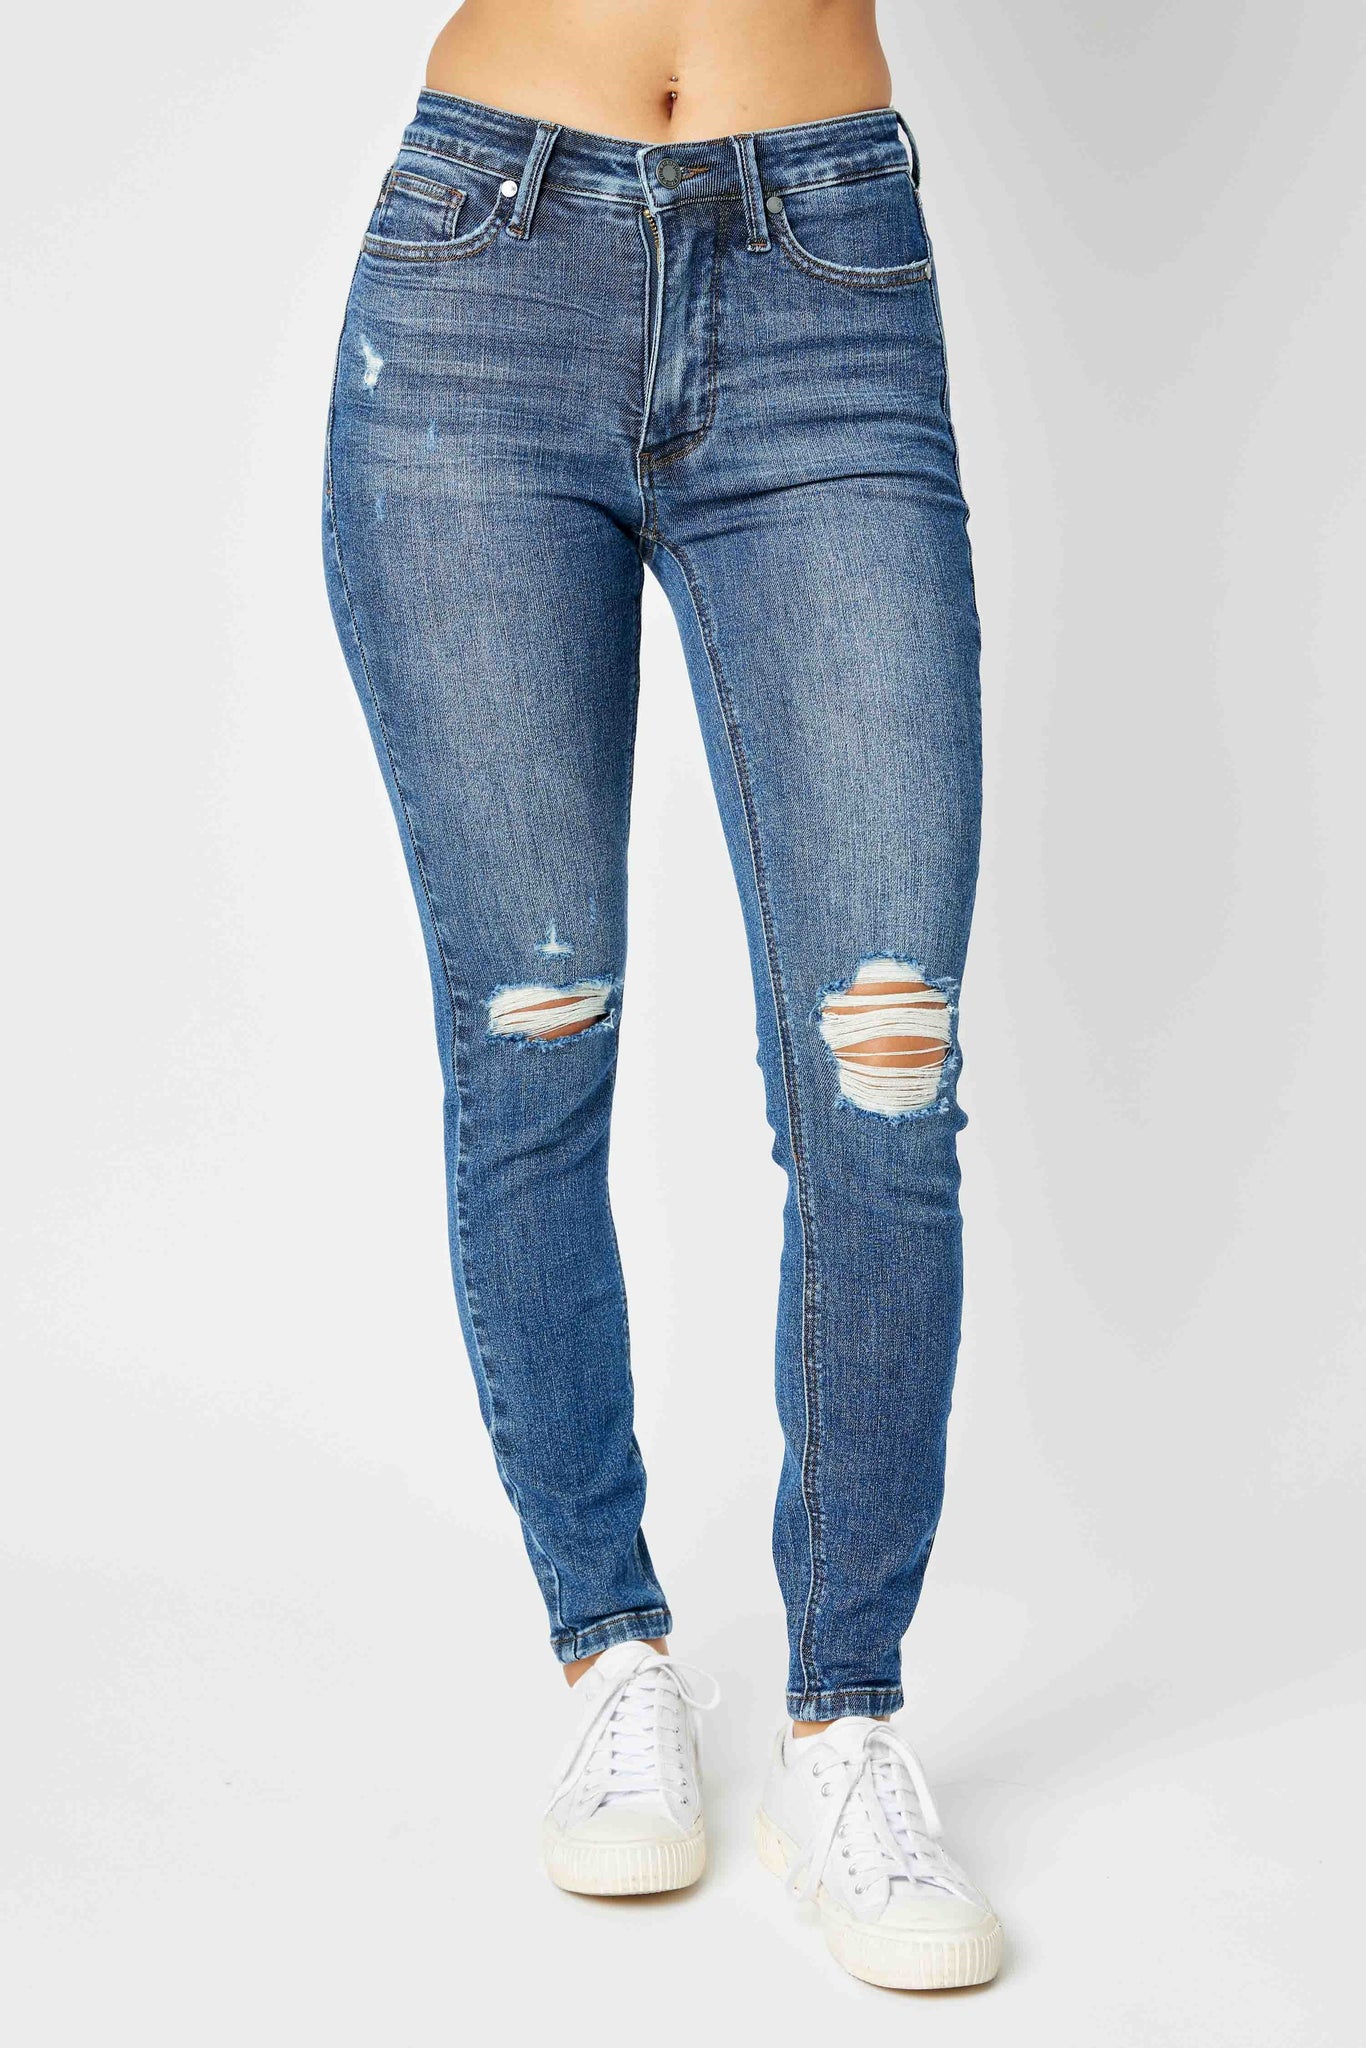 Judy Blue Jessie's Girl Mid Rise Tummy Control Destroy Skinny Jeans, By  Alexa Rae Boutique